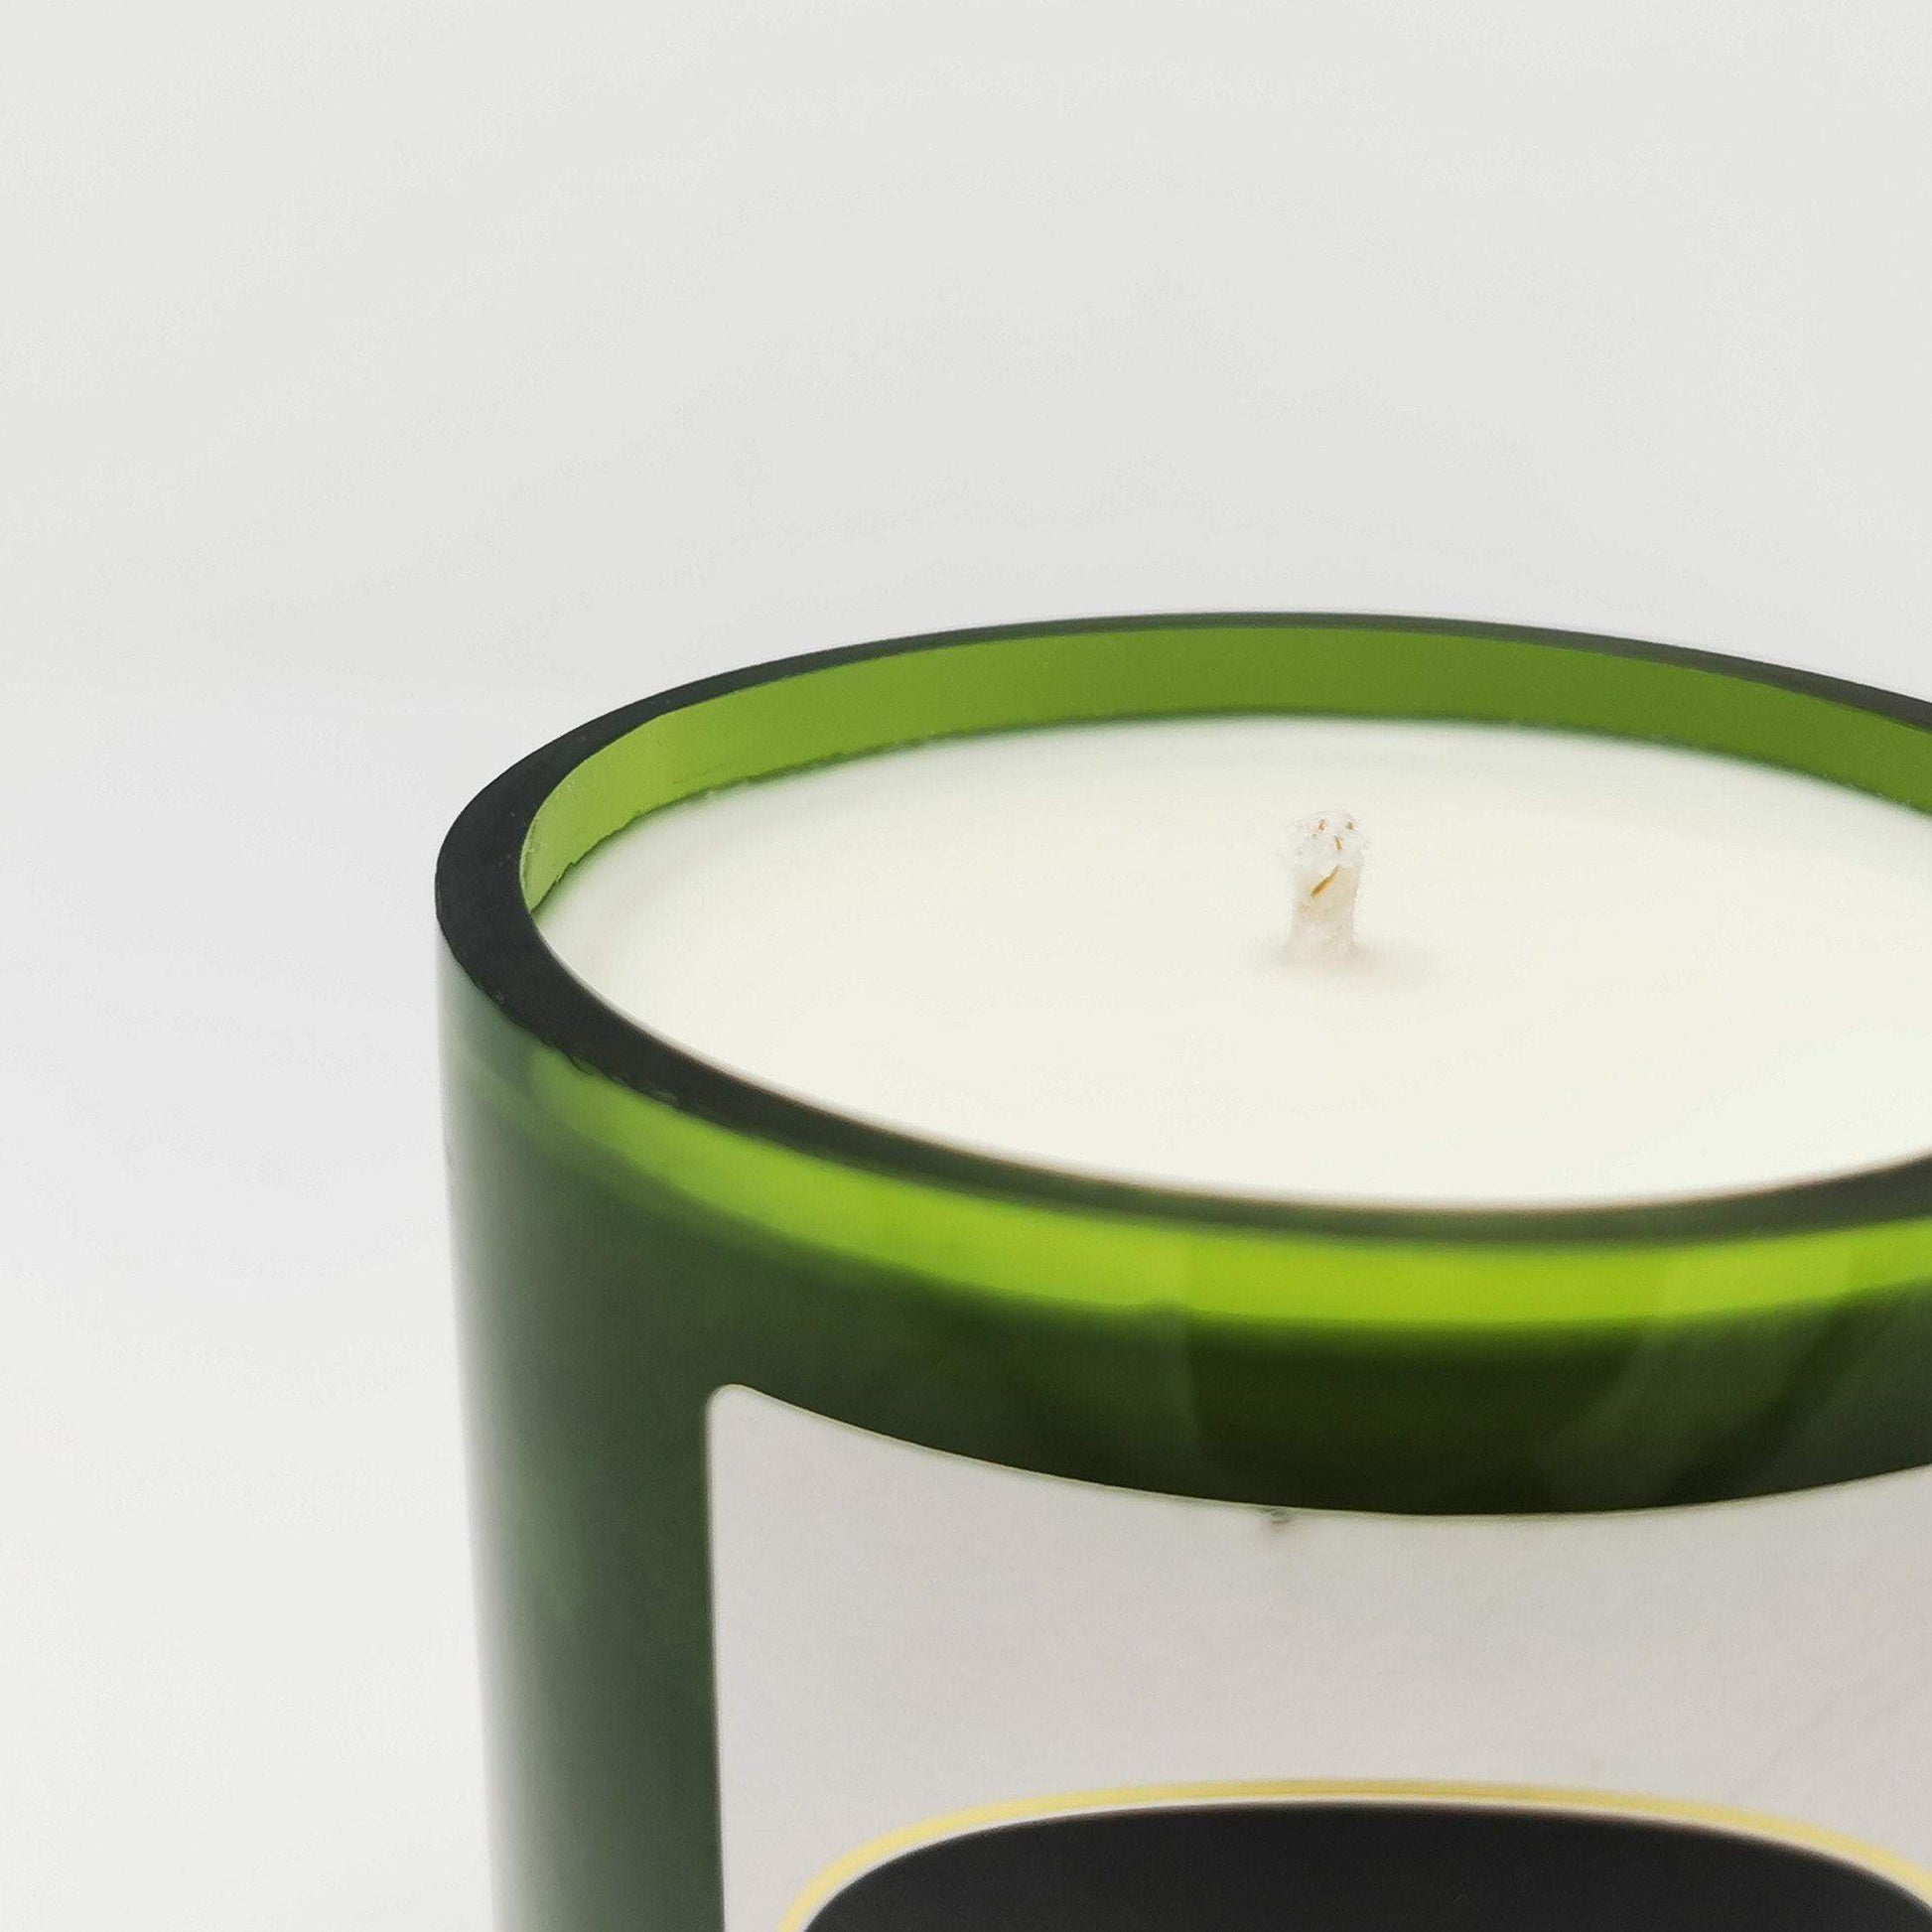 The Societys Prosecco Treviso Bottle Candle-Wine & Prosecco Bottle Candles-Adhock Homeware